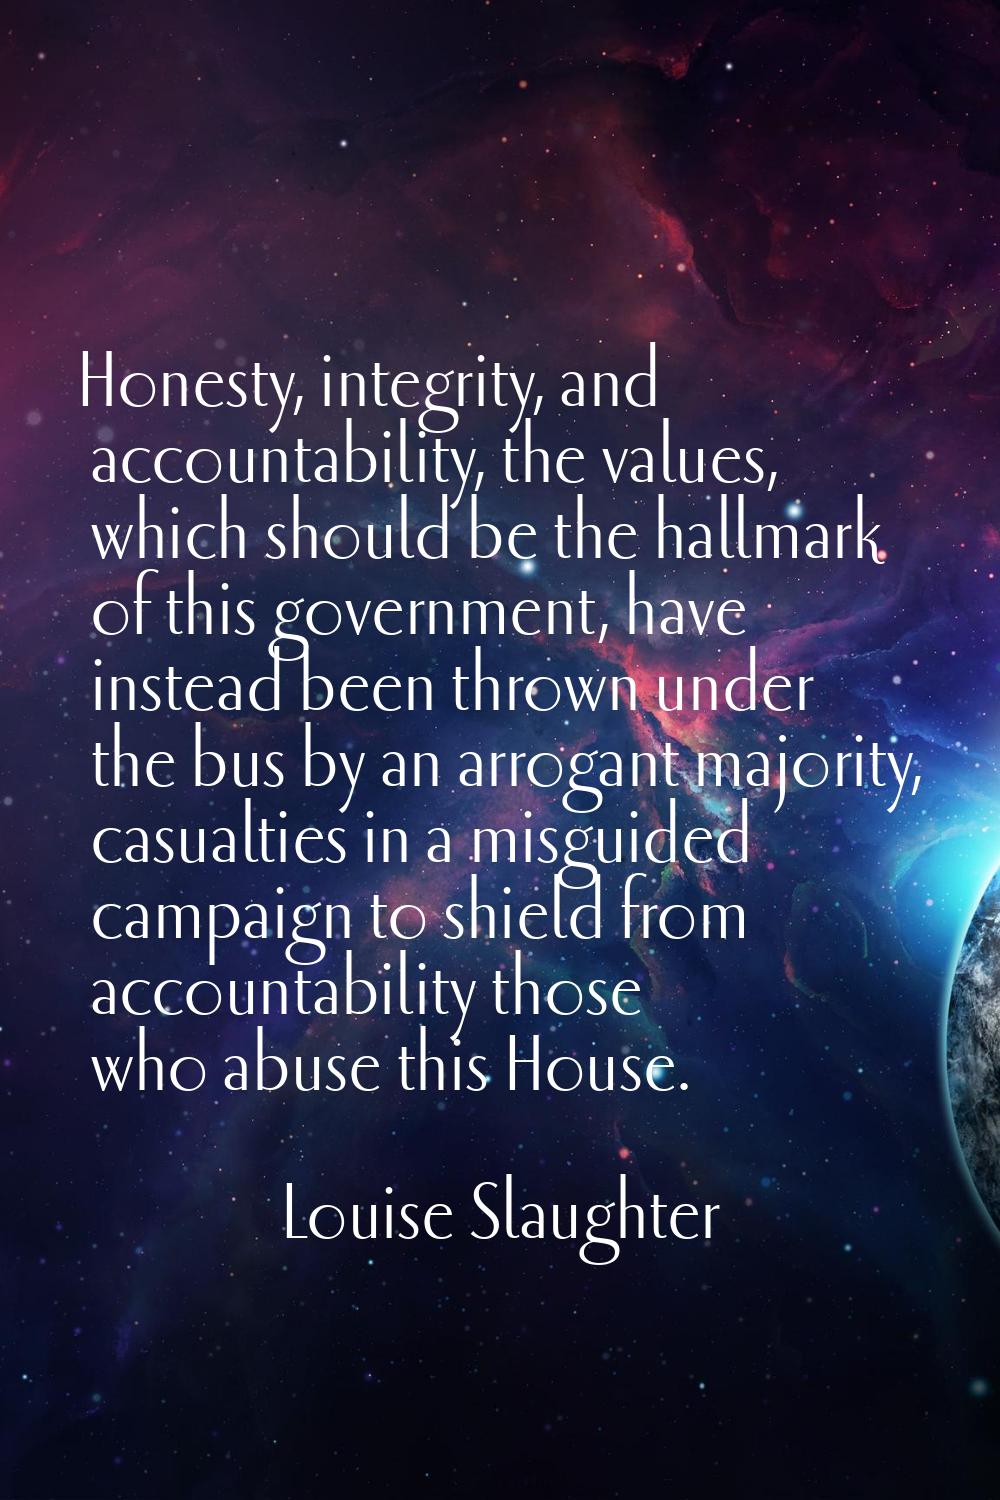 Honesty, integrity, and accountability, the values, which should be the hallmark of this government